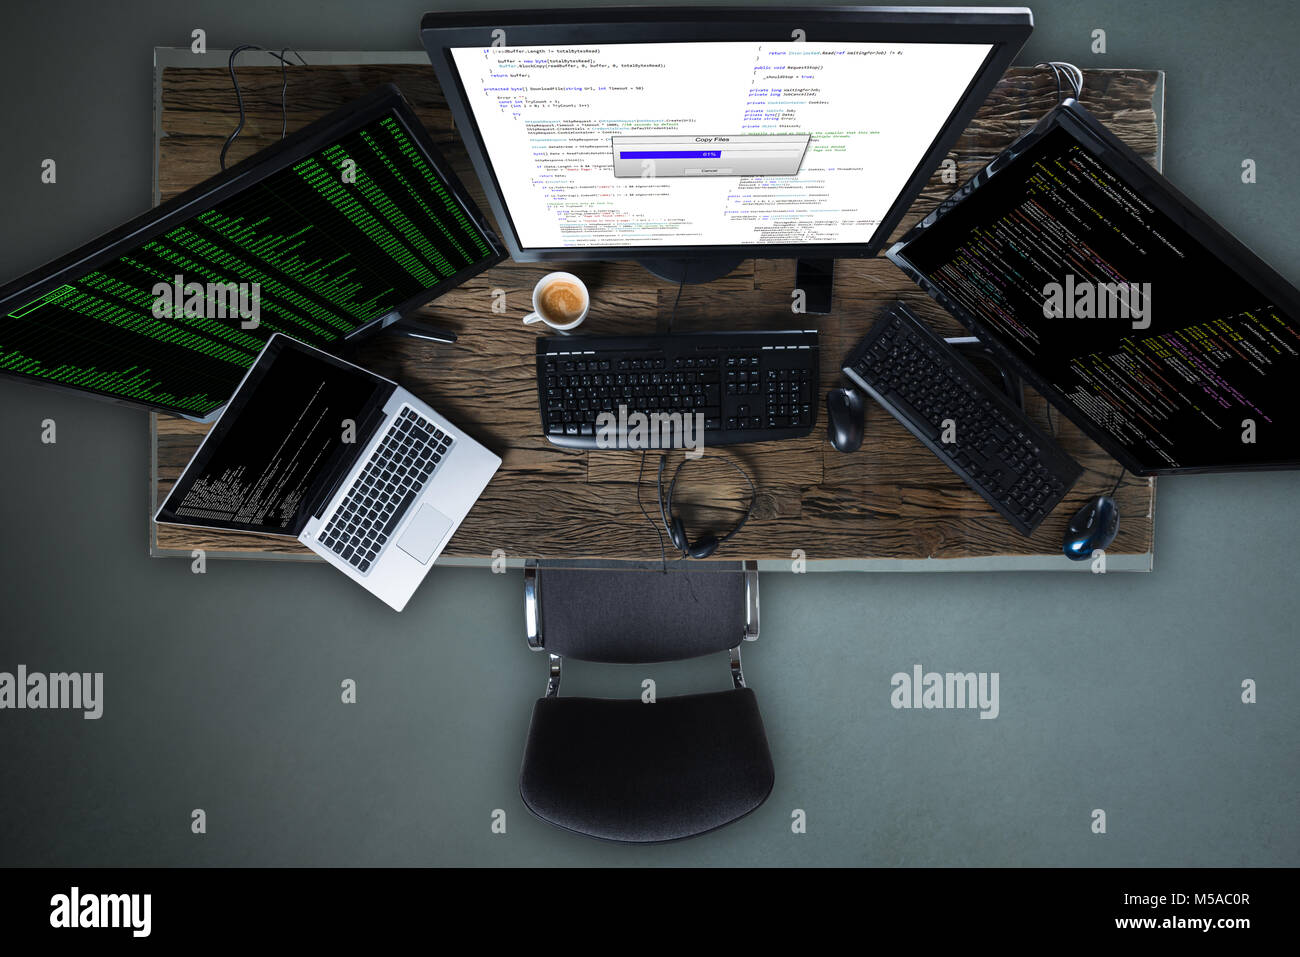 High Angle View Of Multiple Computer Screen Showing Progress Bar Of Copying File On Desk Stock Photo